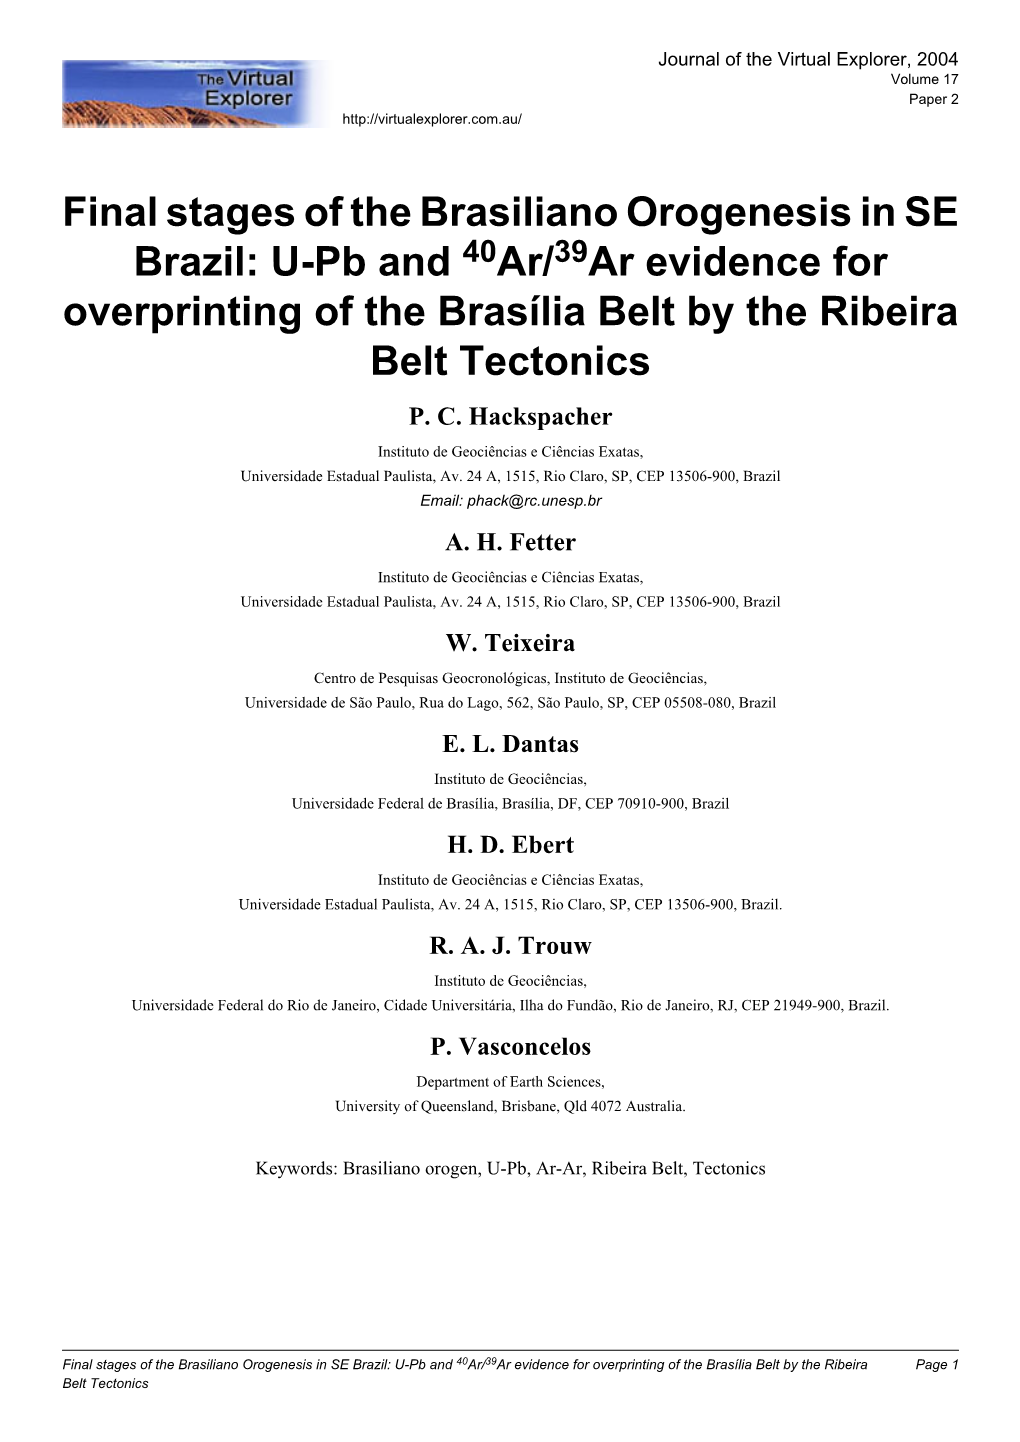 Final Stages of the Brasiliano Orogenesis in SE Brazil: U-Pb and 40Ar/39Ar Evidence for Overprinting of the Brasília Belt by the Ribeira Belt Tectonics P